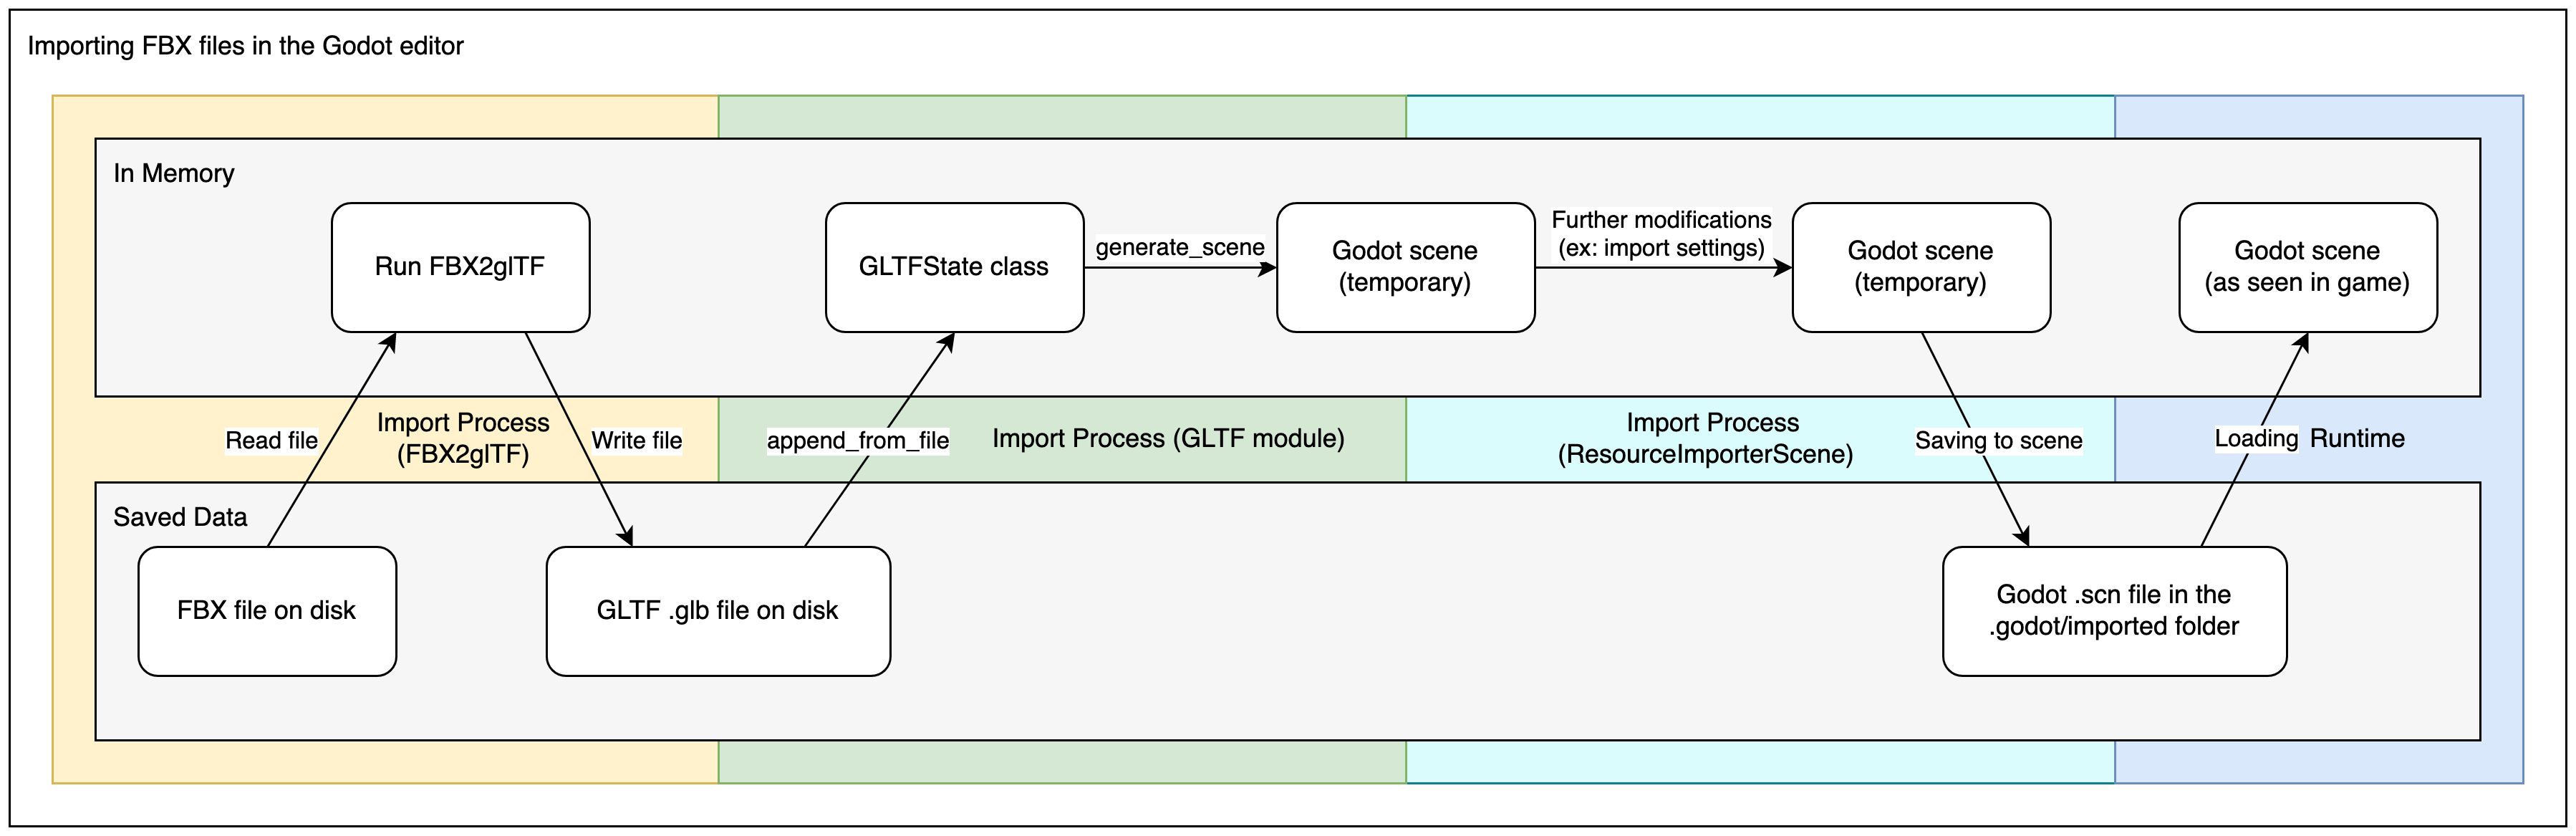 Diagram explaining the import process for FBX files in Godot